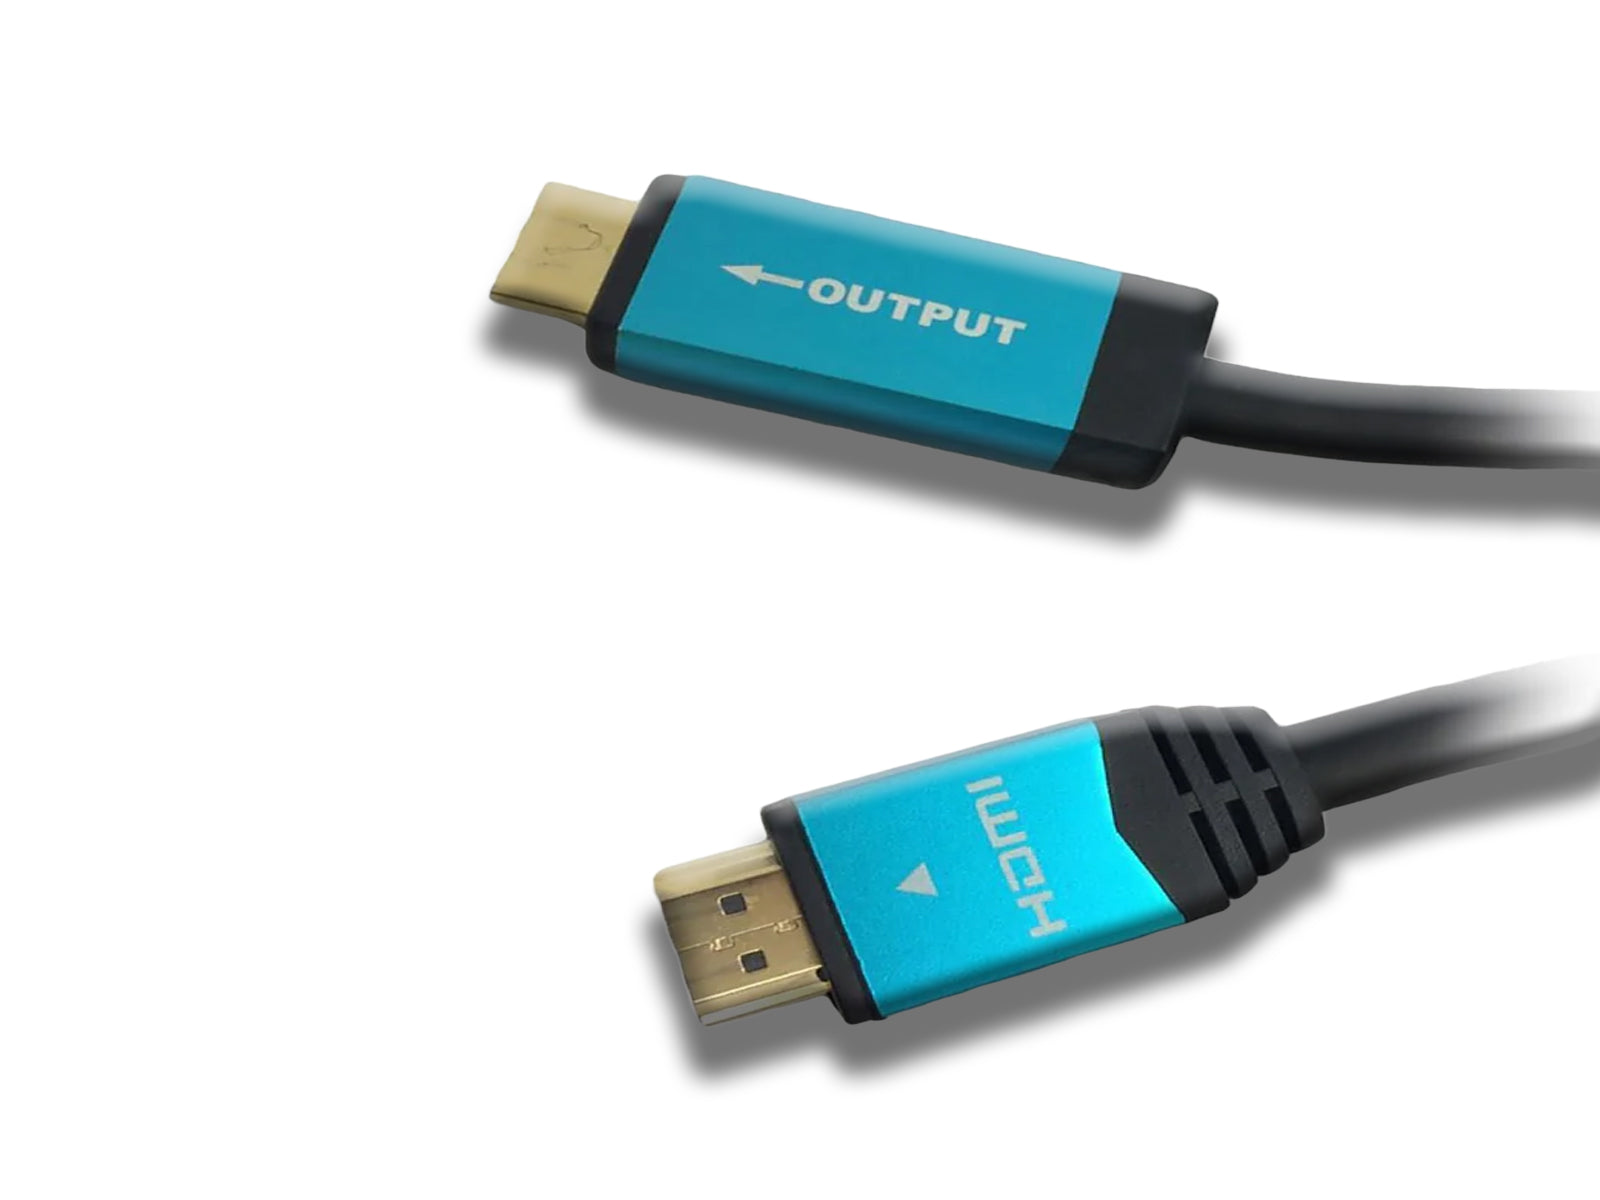 Image-showing-blue-4K-HDMI-cable-on-the-white-background